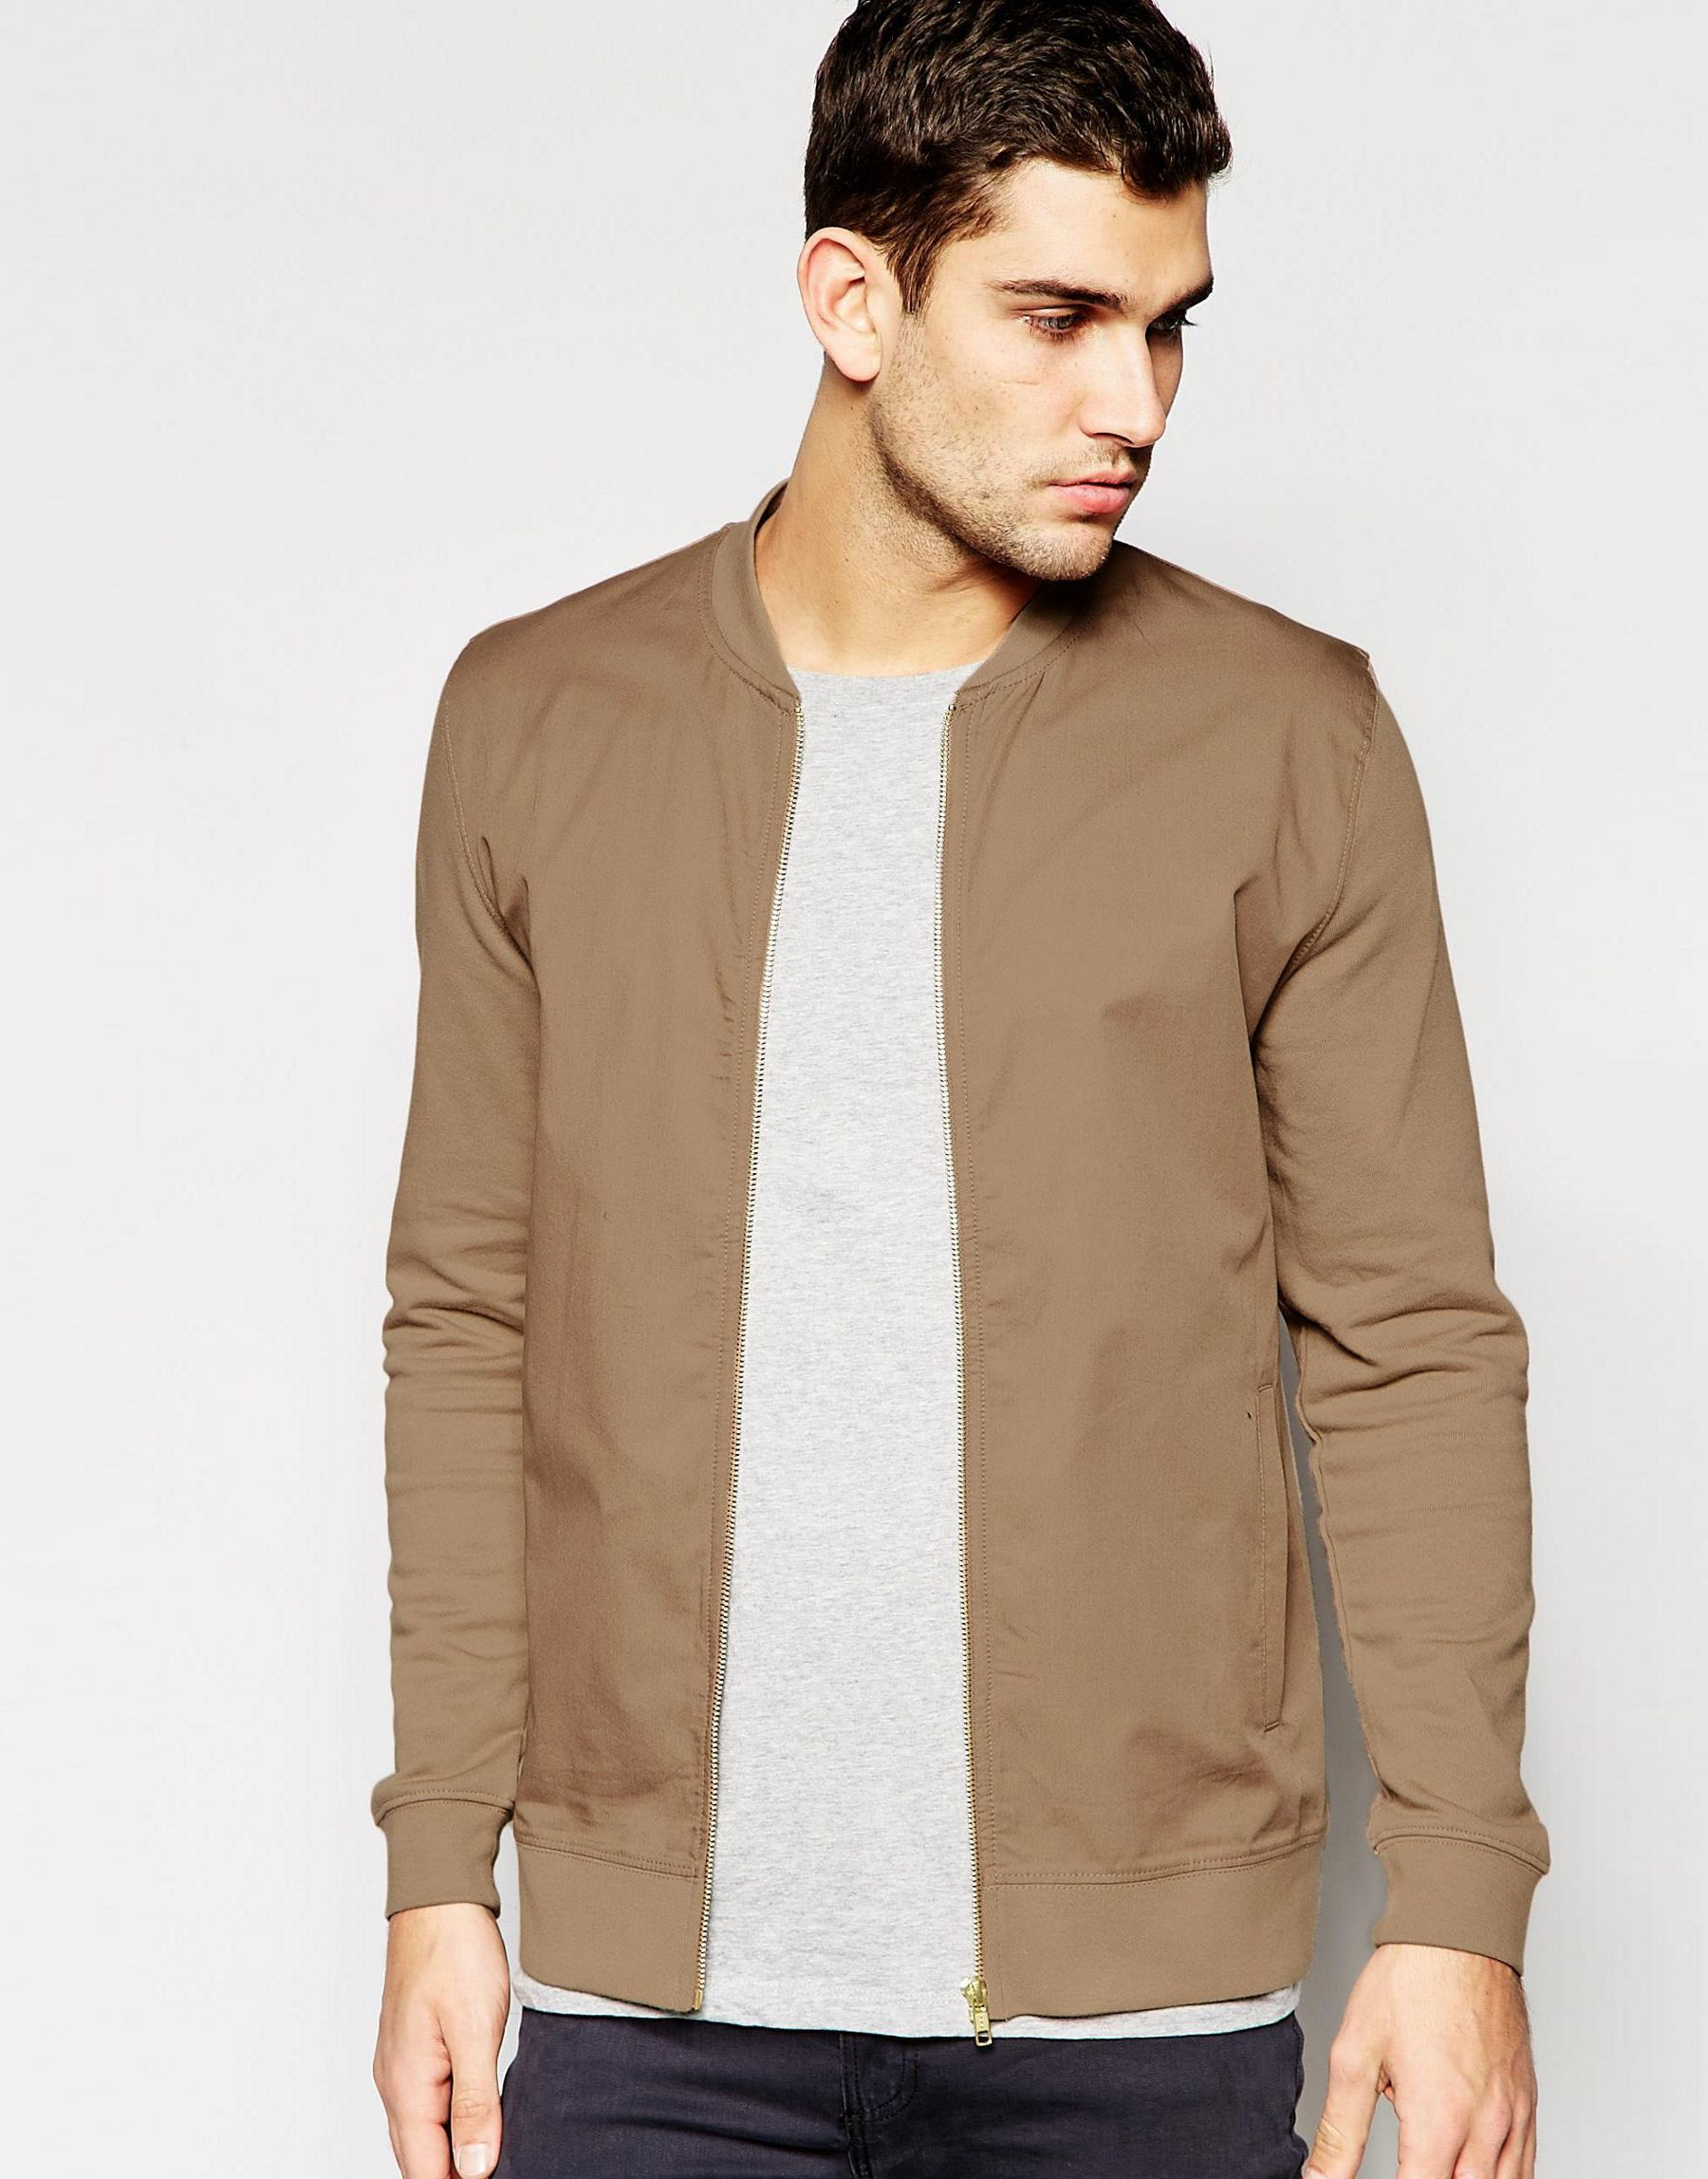 Lyst - ASOS Jersey Bomber Jacket With Woven Front In Camel - Camel in ...